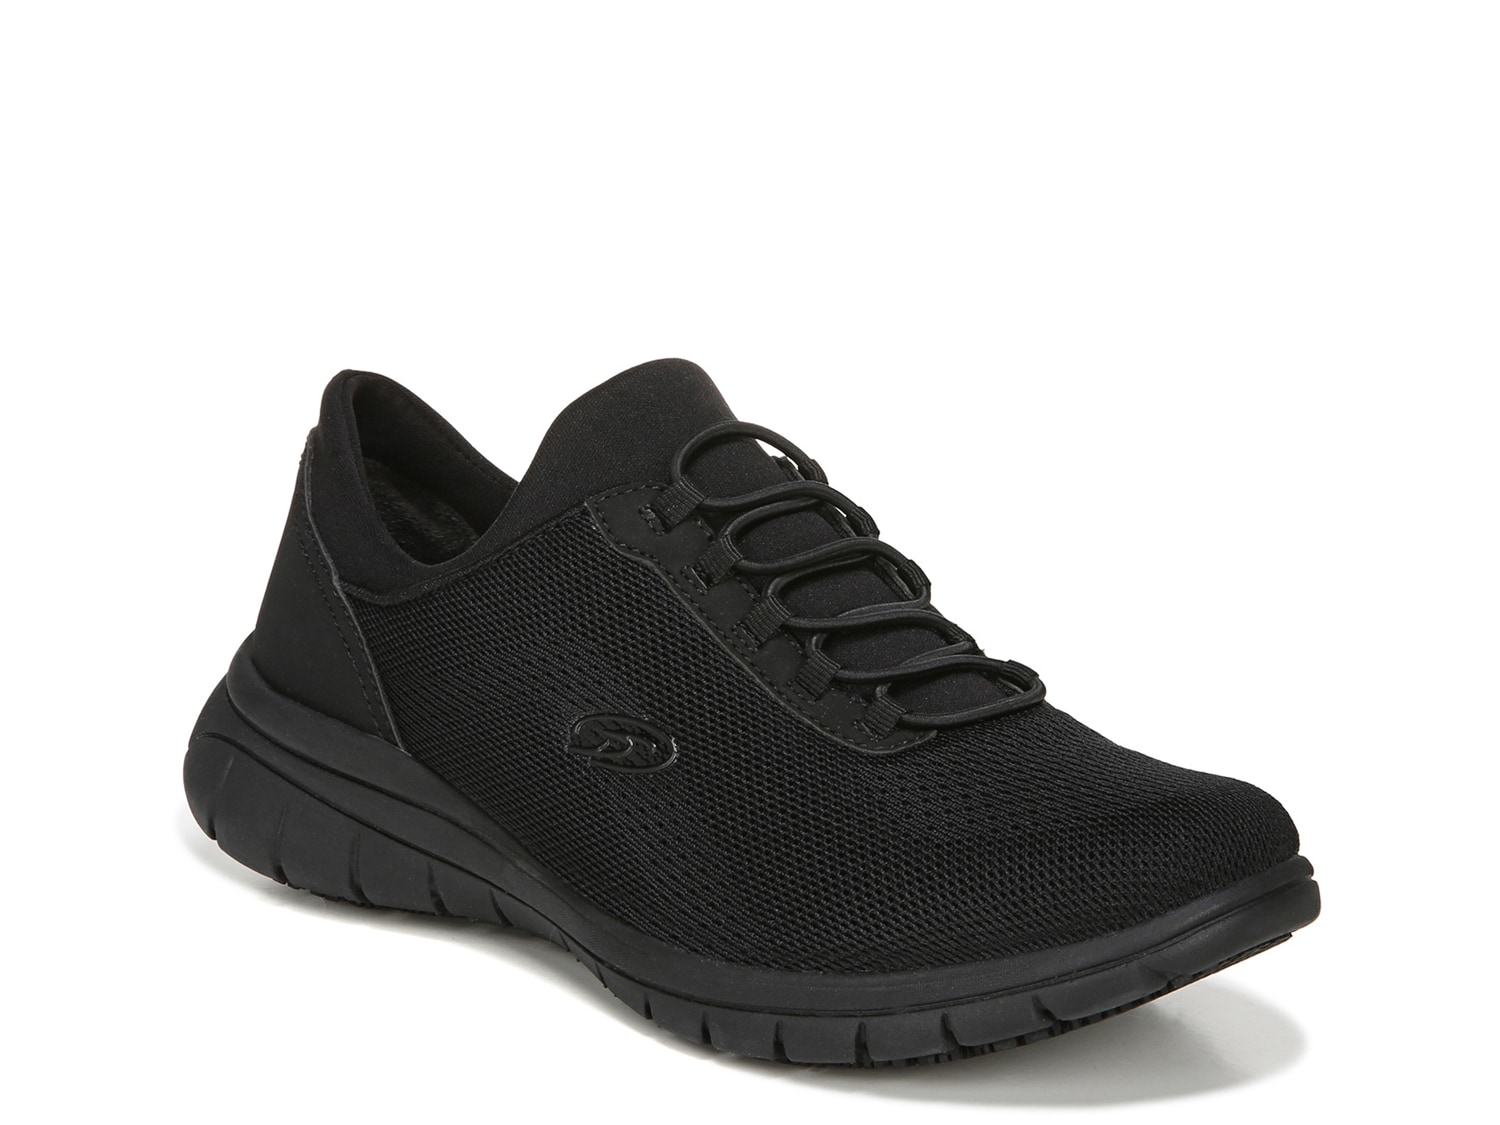 Dr. Scholl's Vision Knit Work Sneaker - Free Shipping | DSW